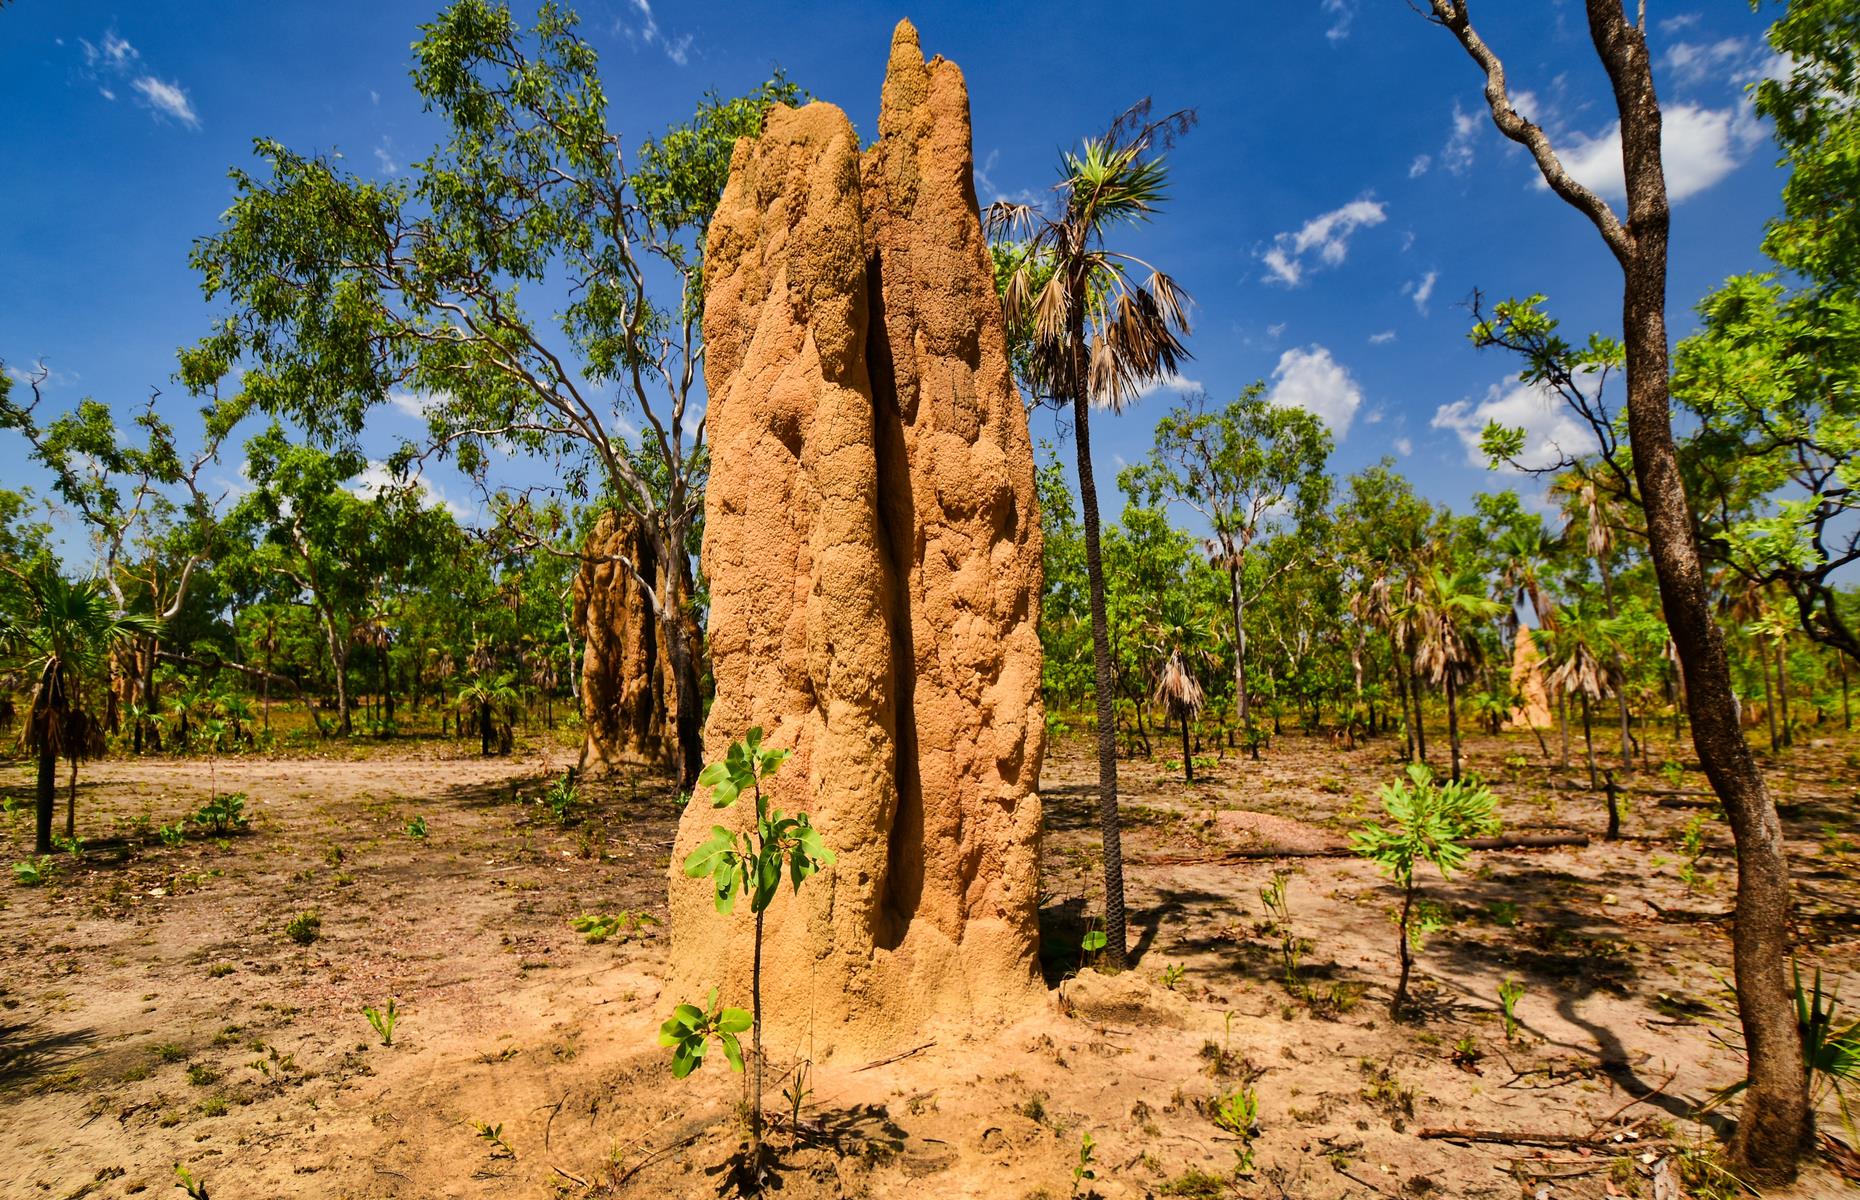 Towering termite mounds, thundering waterfalls and tempting plunge pools characterize Litchfield National Park, which lies a few hours south of Darwin. Walk around the field of giant termite mounds and visit the weathered sandstone pillars of the Lost City then cool off in Florence, Tolmer and Wangi falls. Be sure to follow the Florence Creek Walk through monsoon forest to Buley Rockhole, a collection of natural spas and whirlpools, and an enticing spot to wallow in on a steamy day.